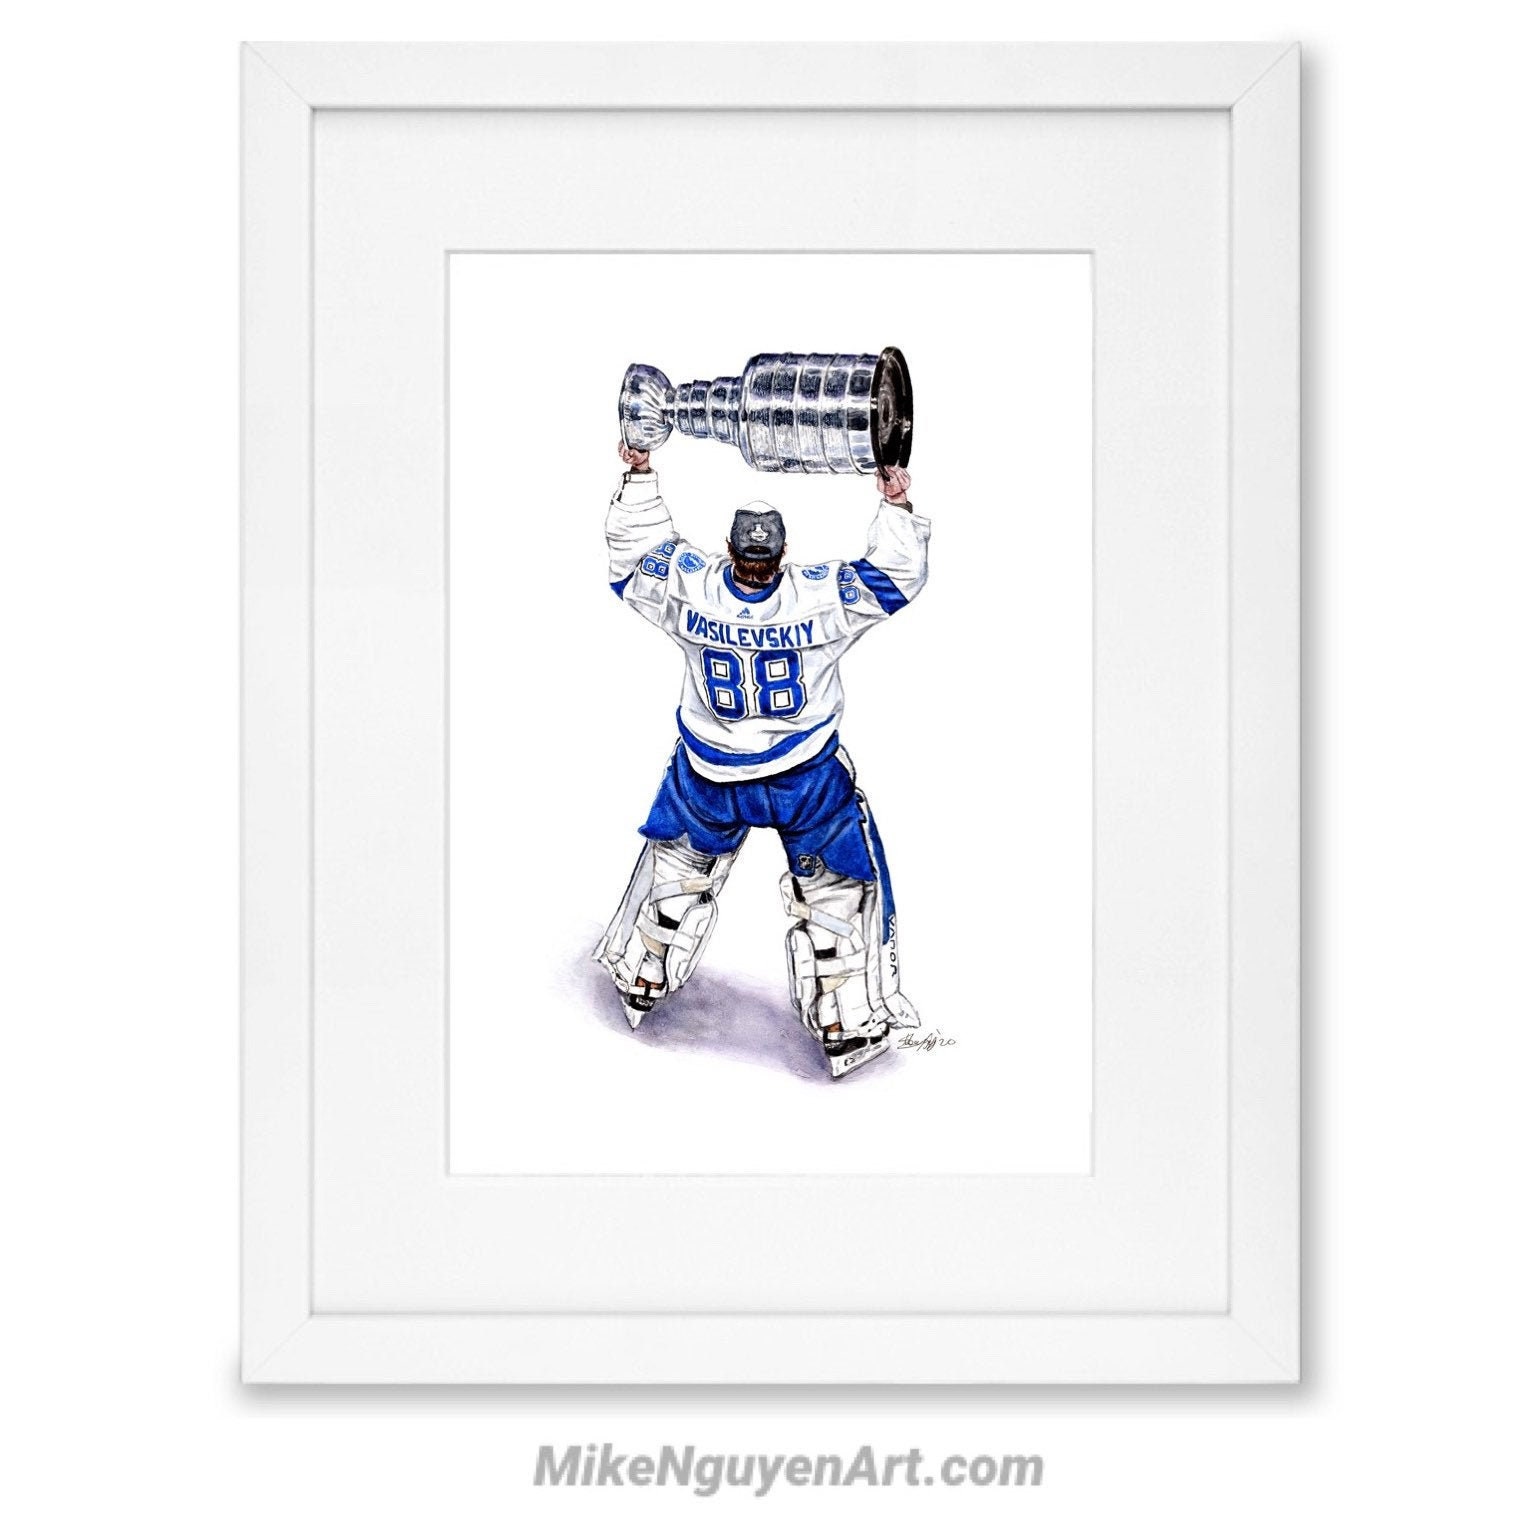 Tampa Bay Lightning: Andrei Vasilevskiy 2020 Stanley Cup Hoist Mural - NHL Removable Wall Adhesive Wall Decal Large